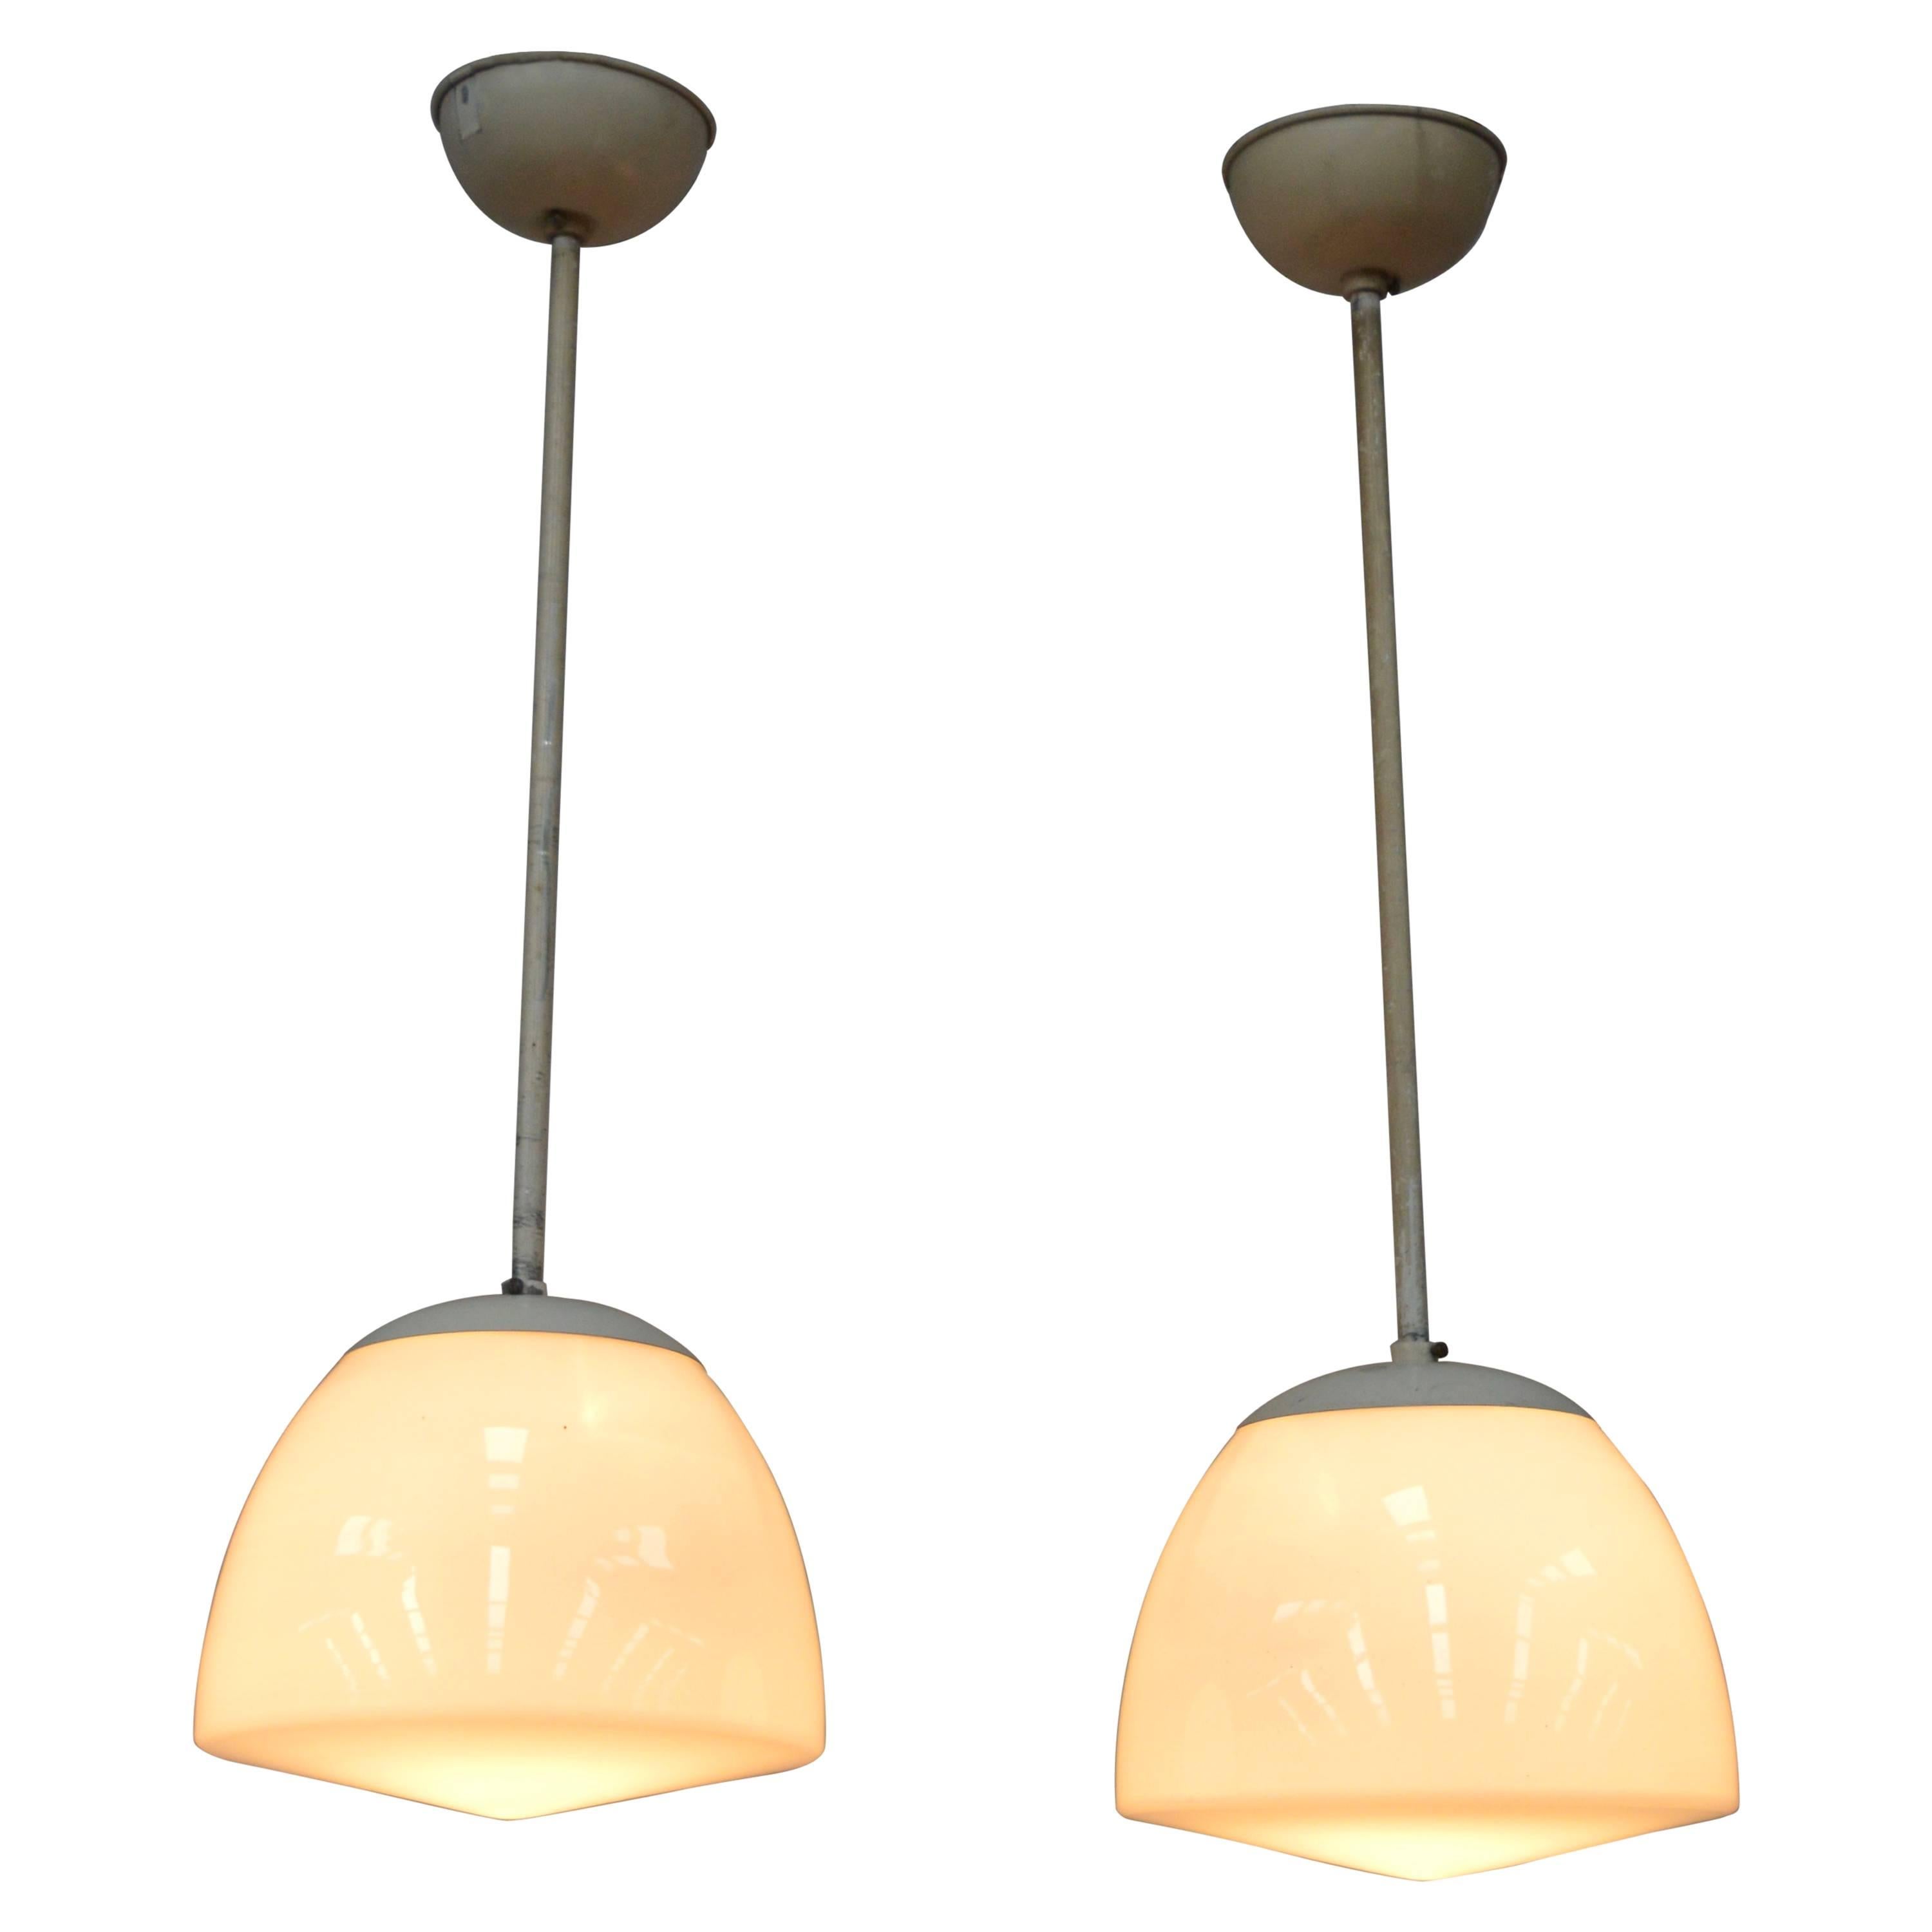 Pair of Early Gispen Pendant Lamps, Netherlands, 1930s-1940s For Sale